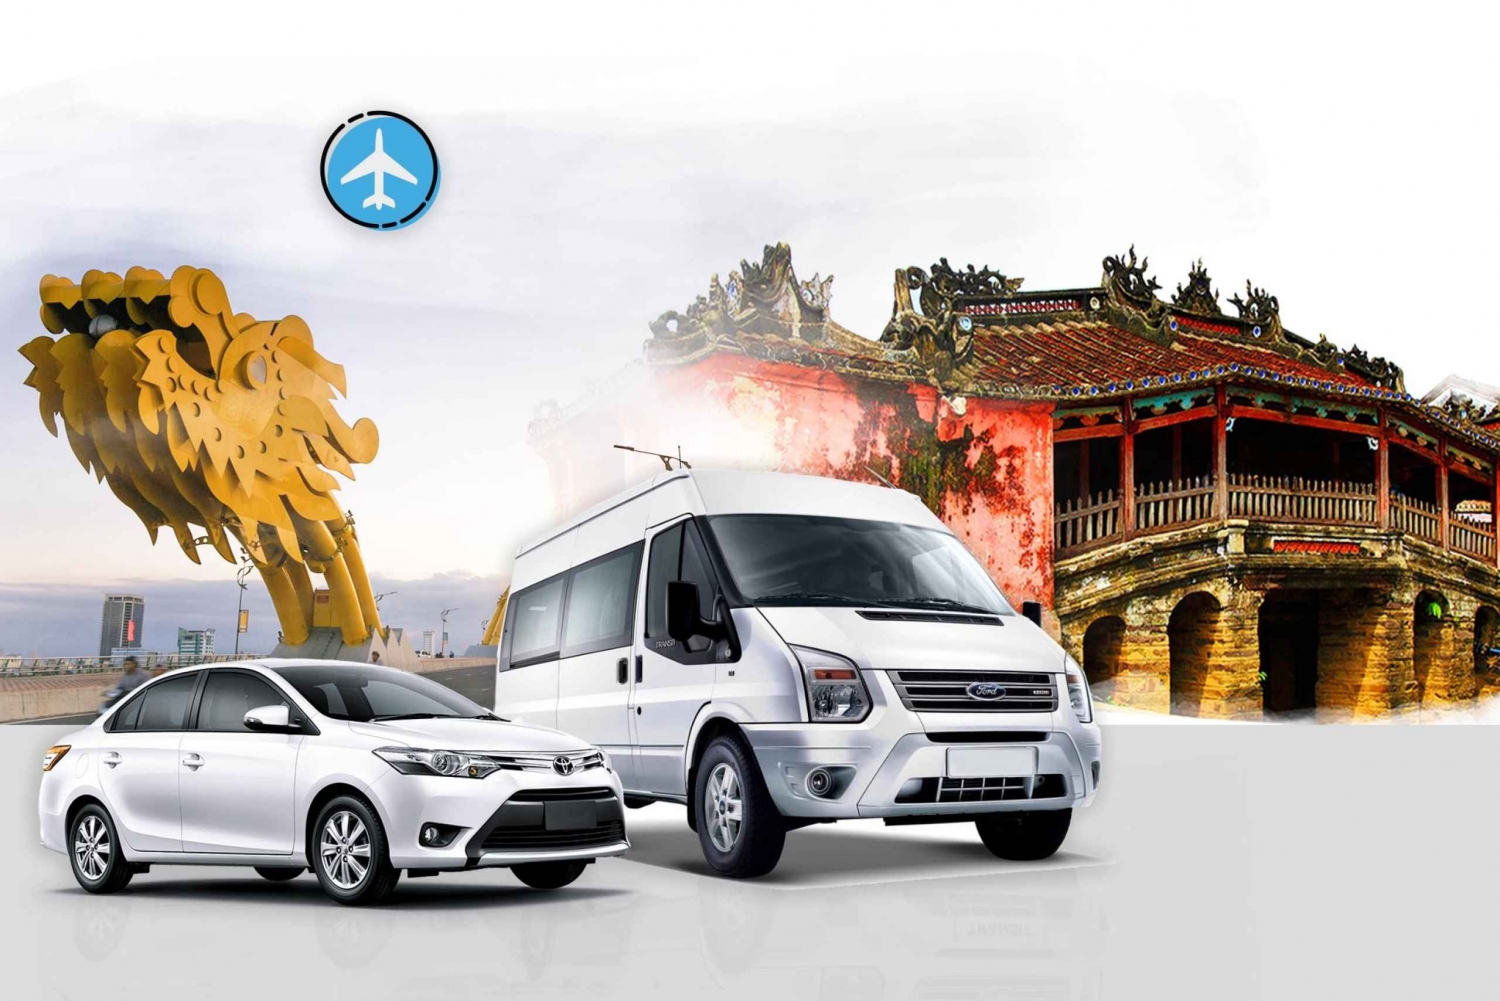 Da Nang City: Private Transfer to/from Hoi An City